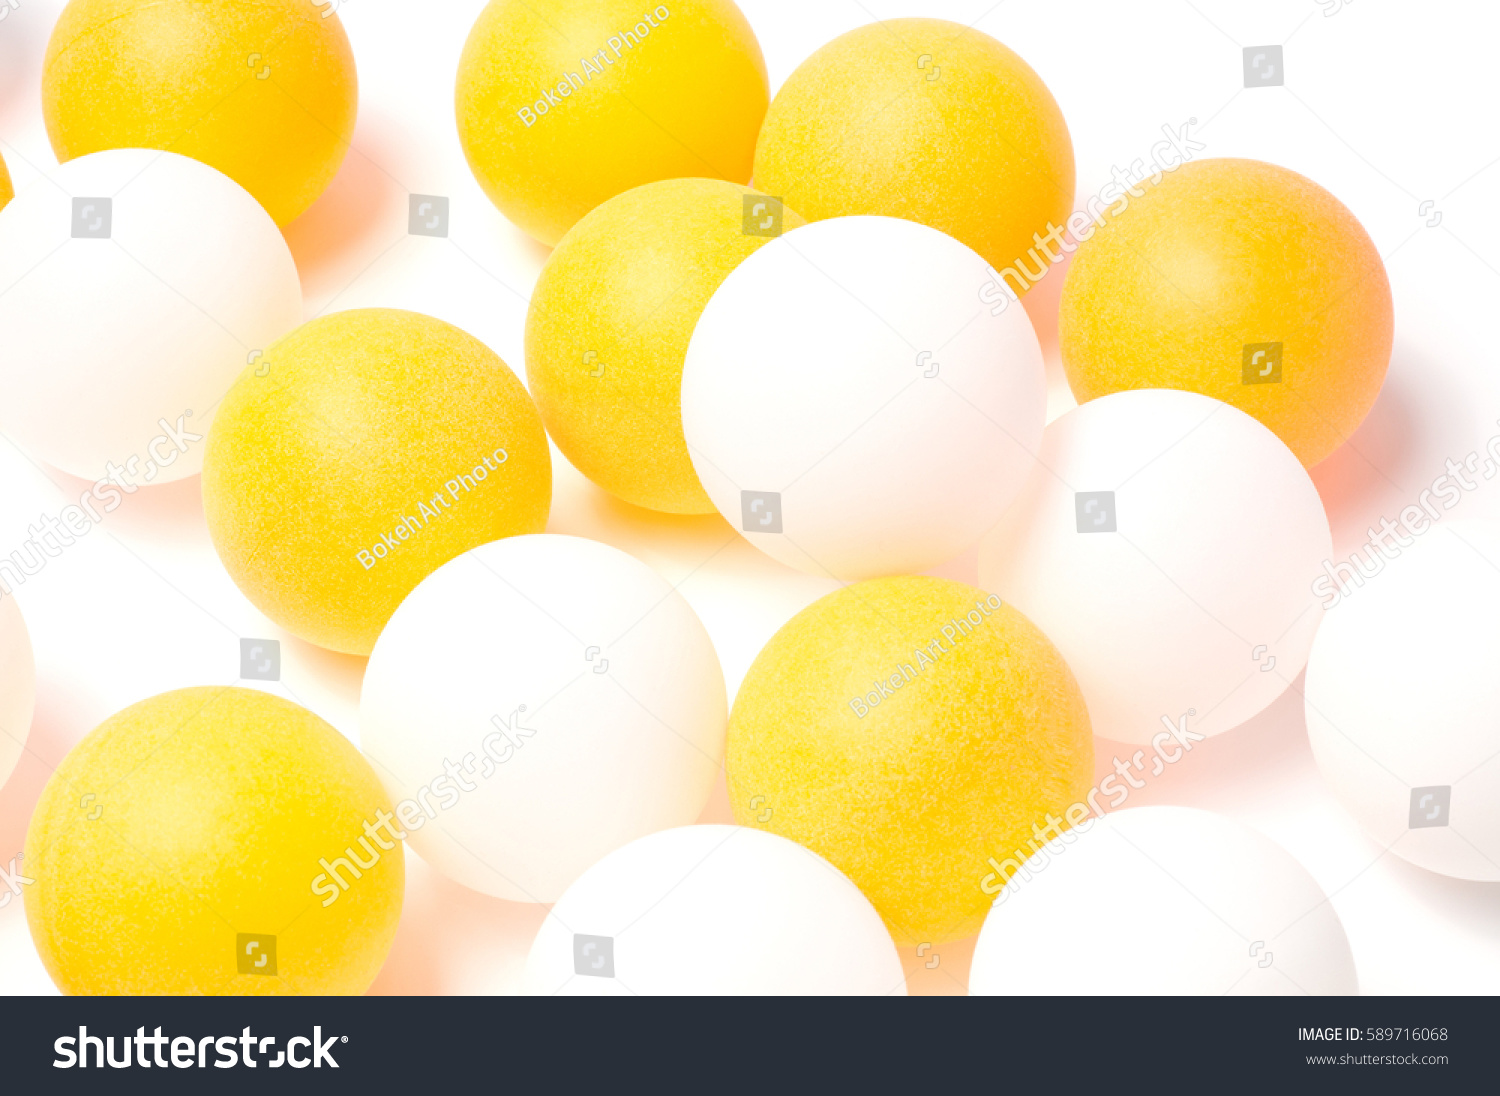 Ping pong balls for table tennis close-up #589716068